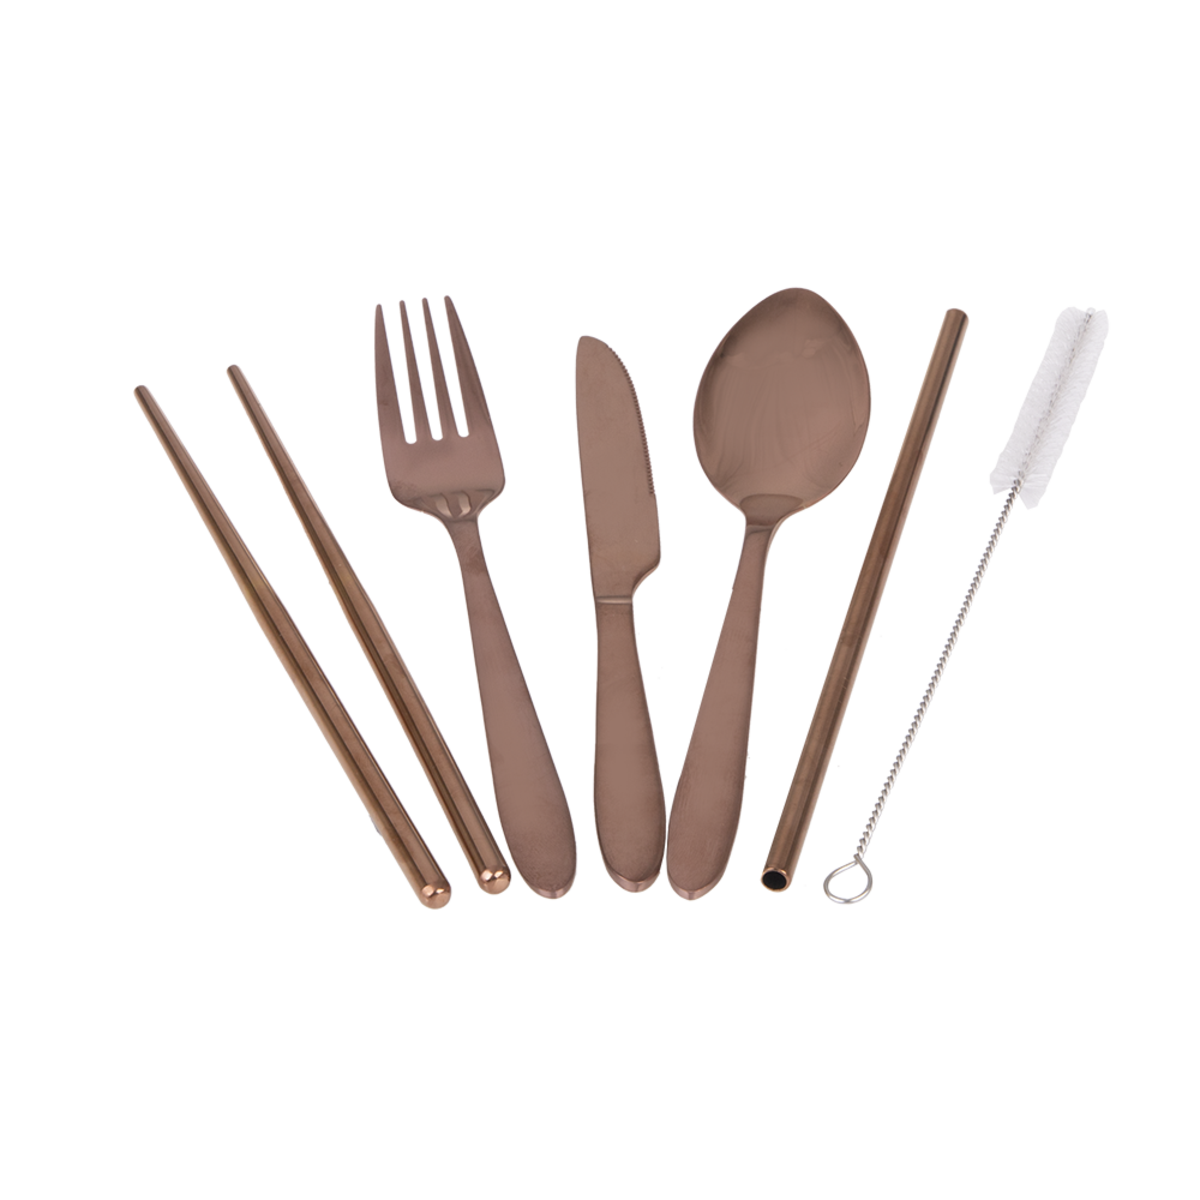 APPETITO 6 PIECE STAINLESS STEEL TRAVELLER'S CUTLERY SET - ROSE GOLD